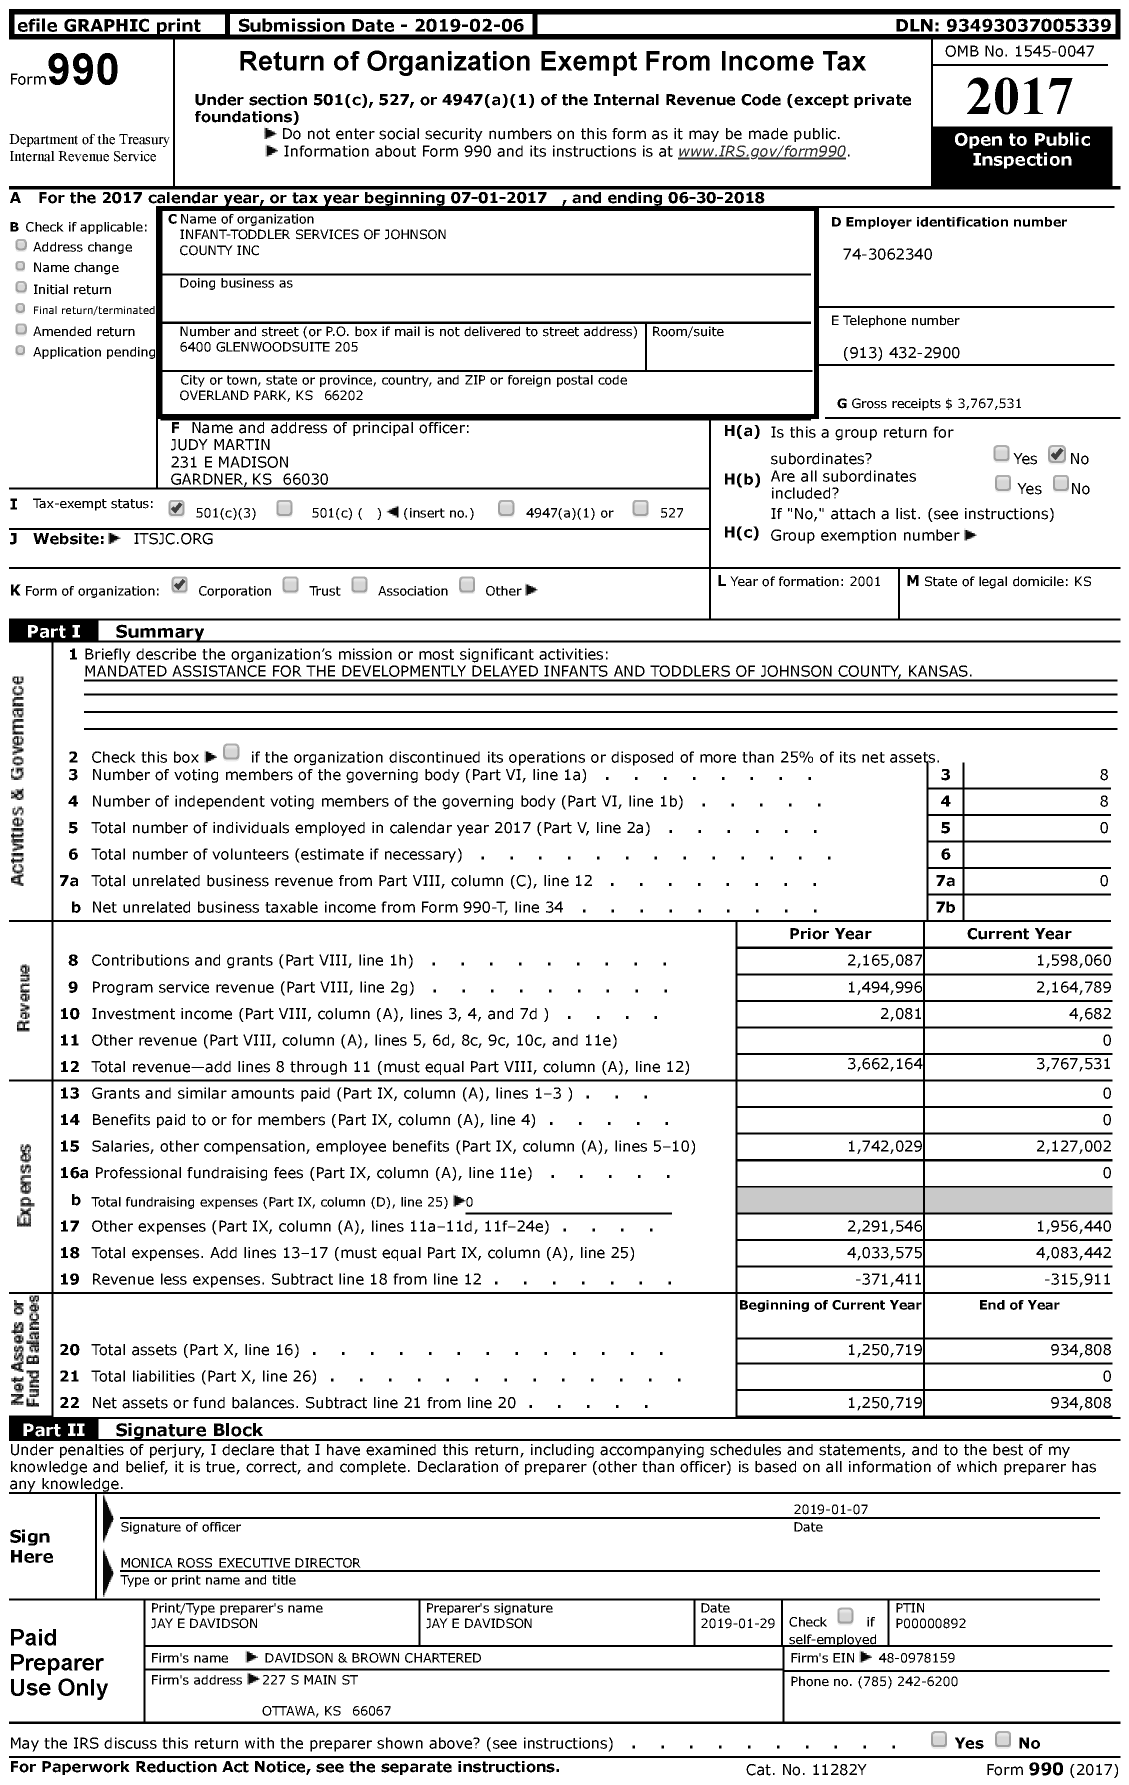 Image of first page of 2017 Form 990 for Infant-Toddler Services of Johnson County